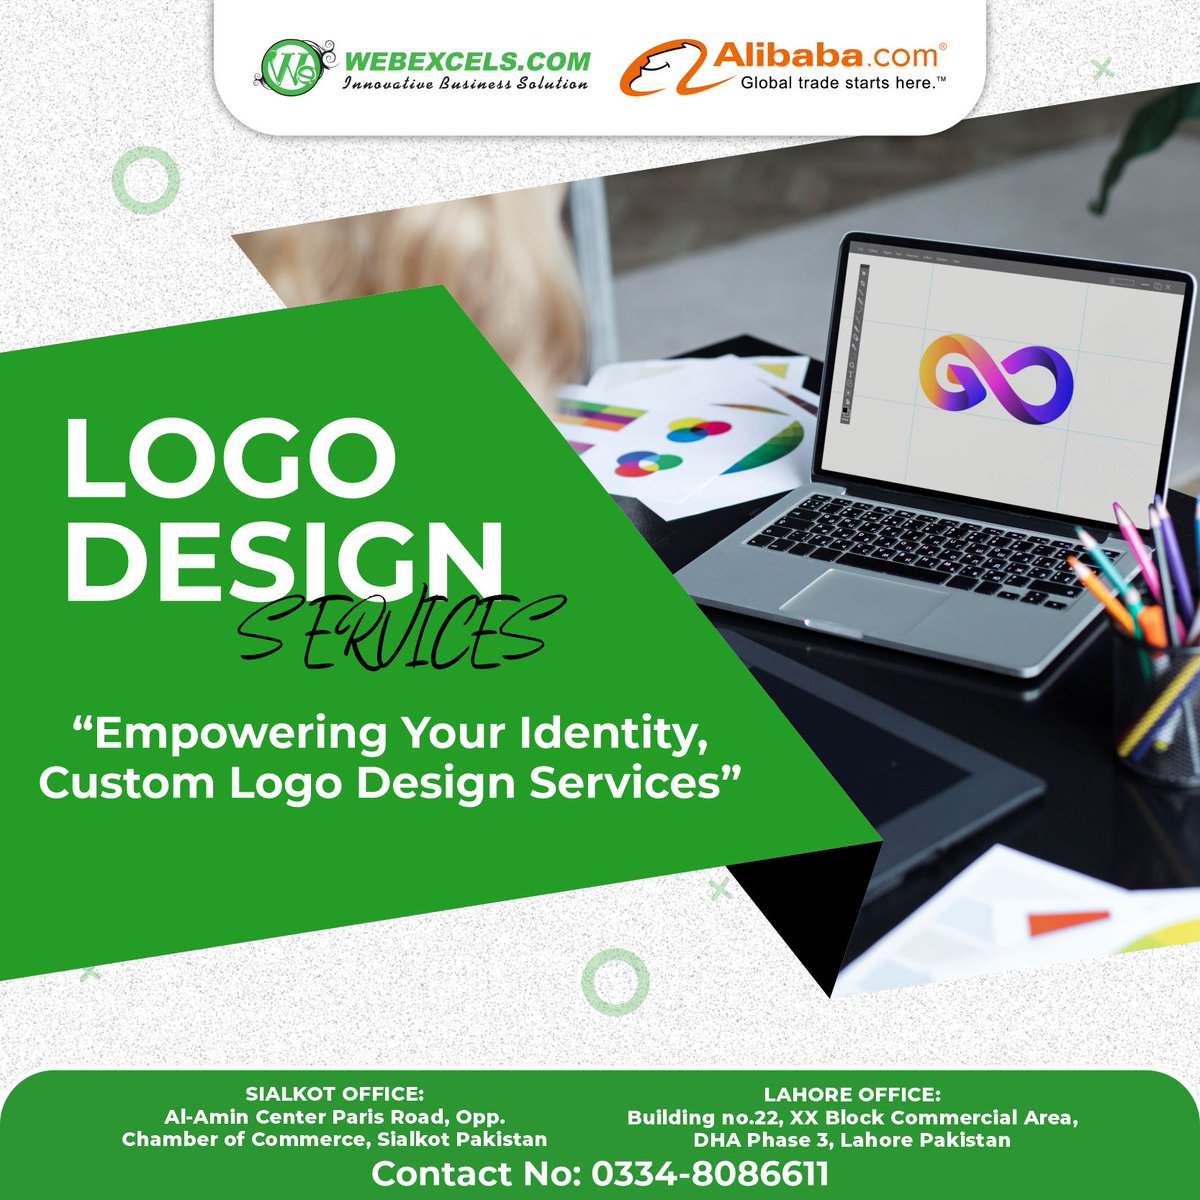 'Elevate Your Brand with Stunning Logos by Web Excels! 🎨✨ #LogoDesigning #WebExcelsDesigns #BrandIdentity #CreativeDesign #CustomLogos #LogoExperts #BrandEnhancement #StandOutFromTheRest #LogoMakers #UnleashYourBrand'